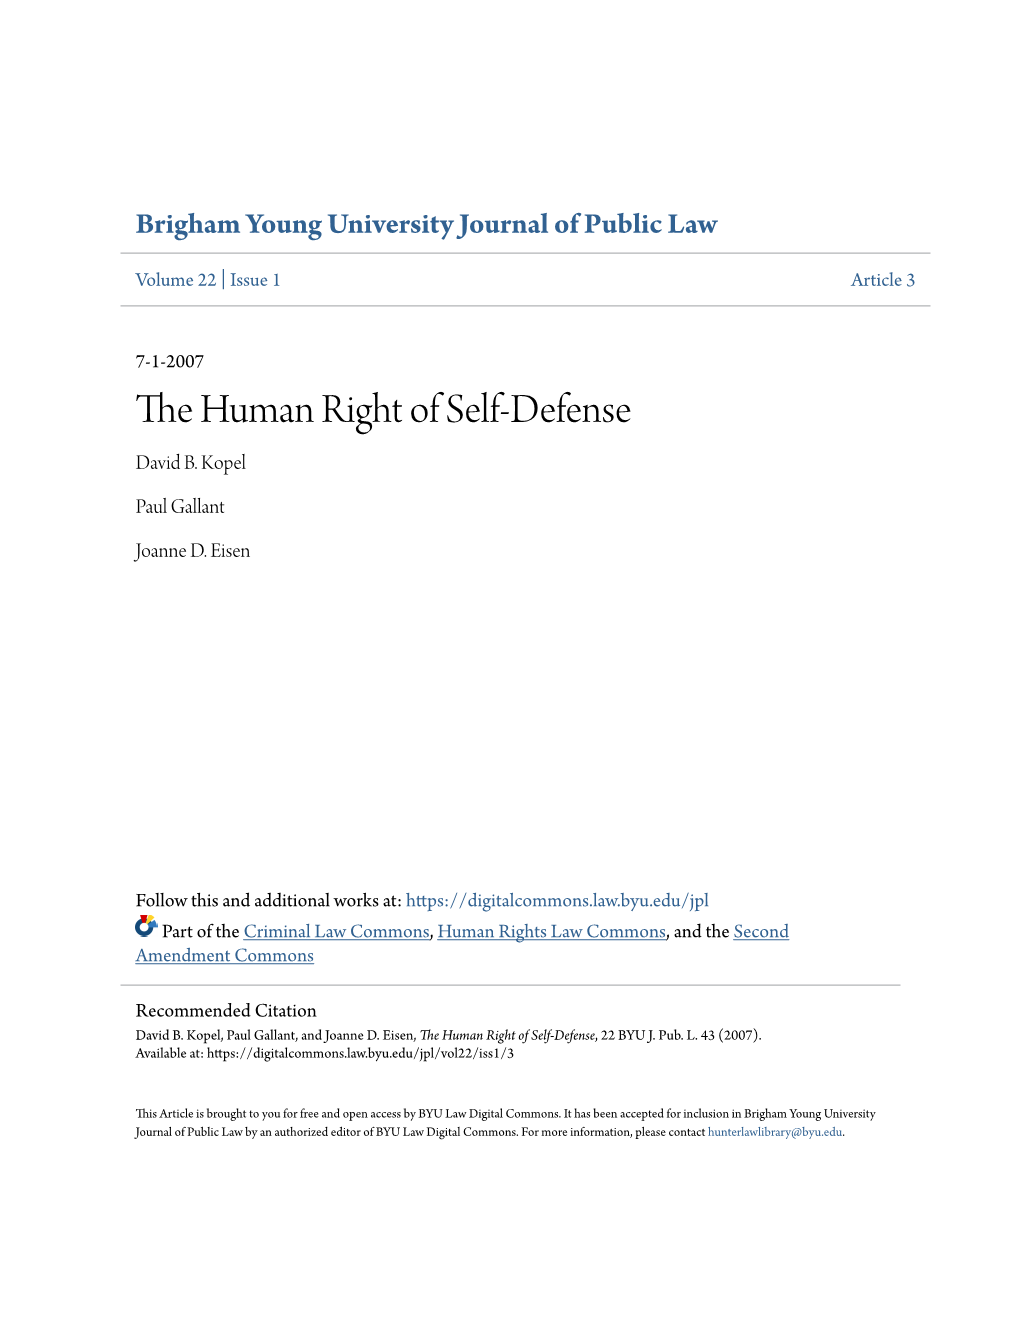 The Human Right of Self-Defense, 22 BYU J